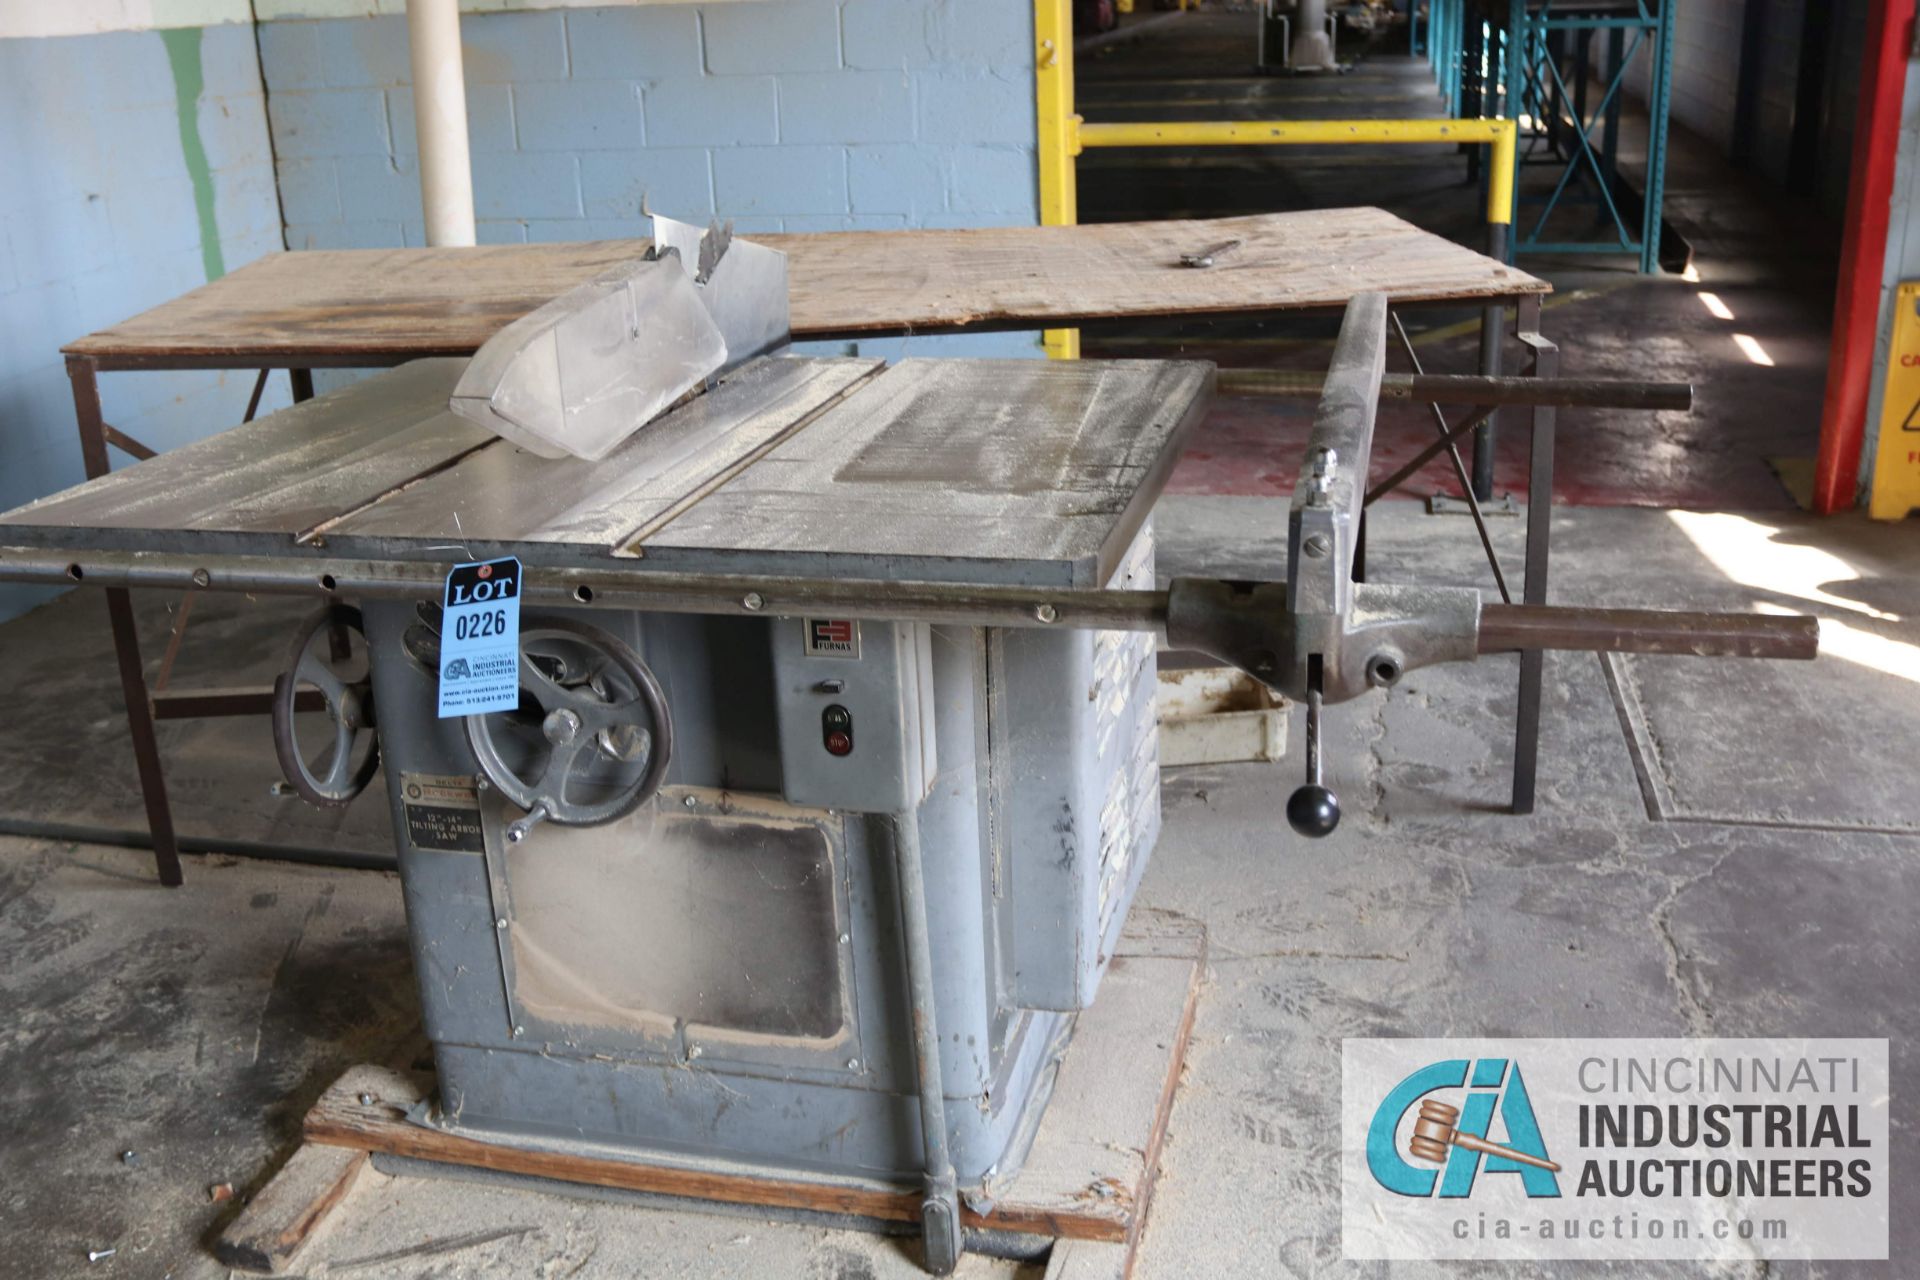 12" - 14" DELTA ROCKWELL TILTING ARBOR HEAVY DUTY TABLE SAW - $50.00 Rigging Fee Due to Onsite